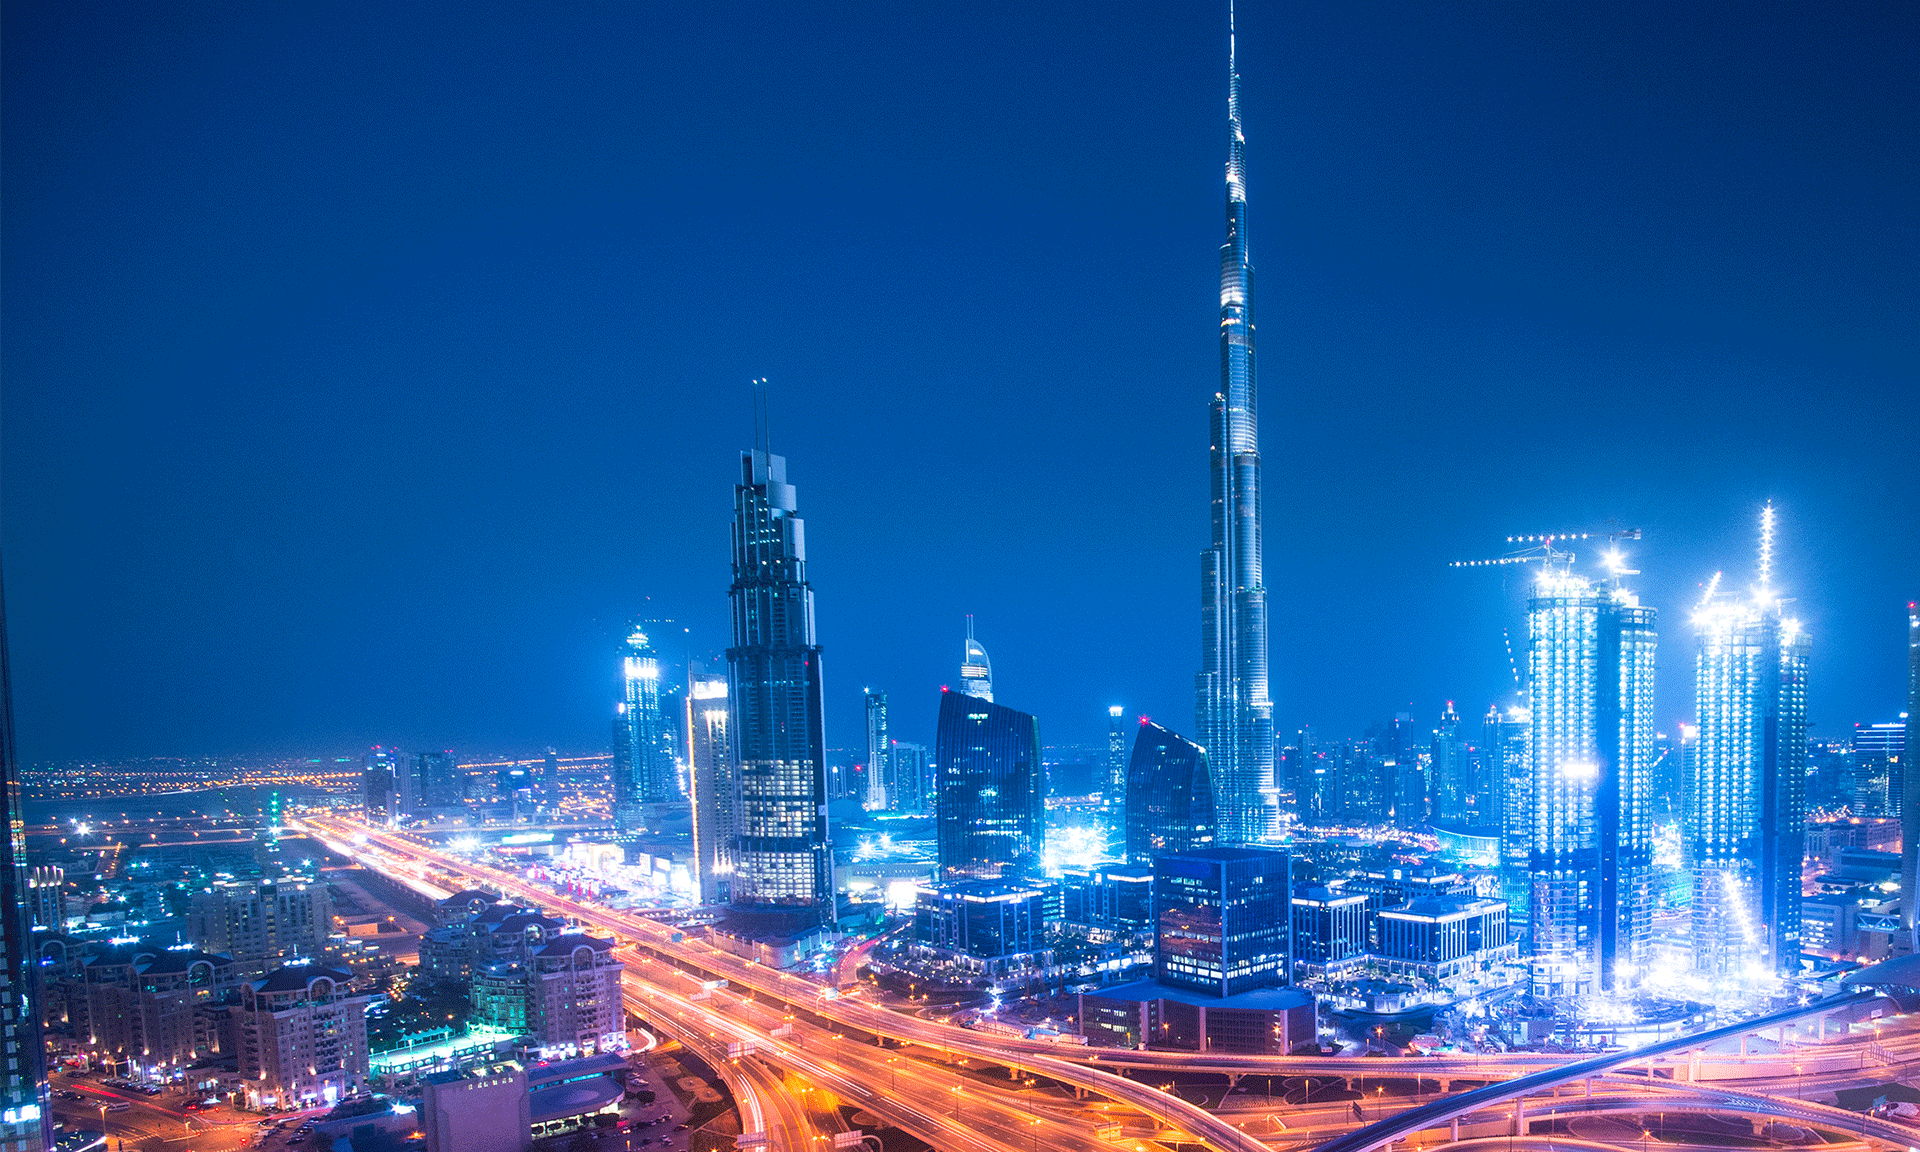 The New Electronic Transactions and Trust Services Law Signals a New Stage of Digital Transformation in the UAE